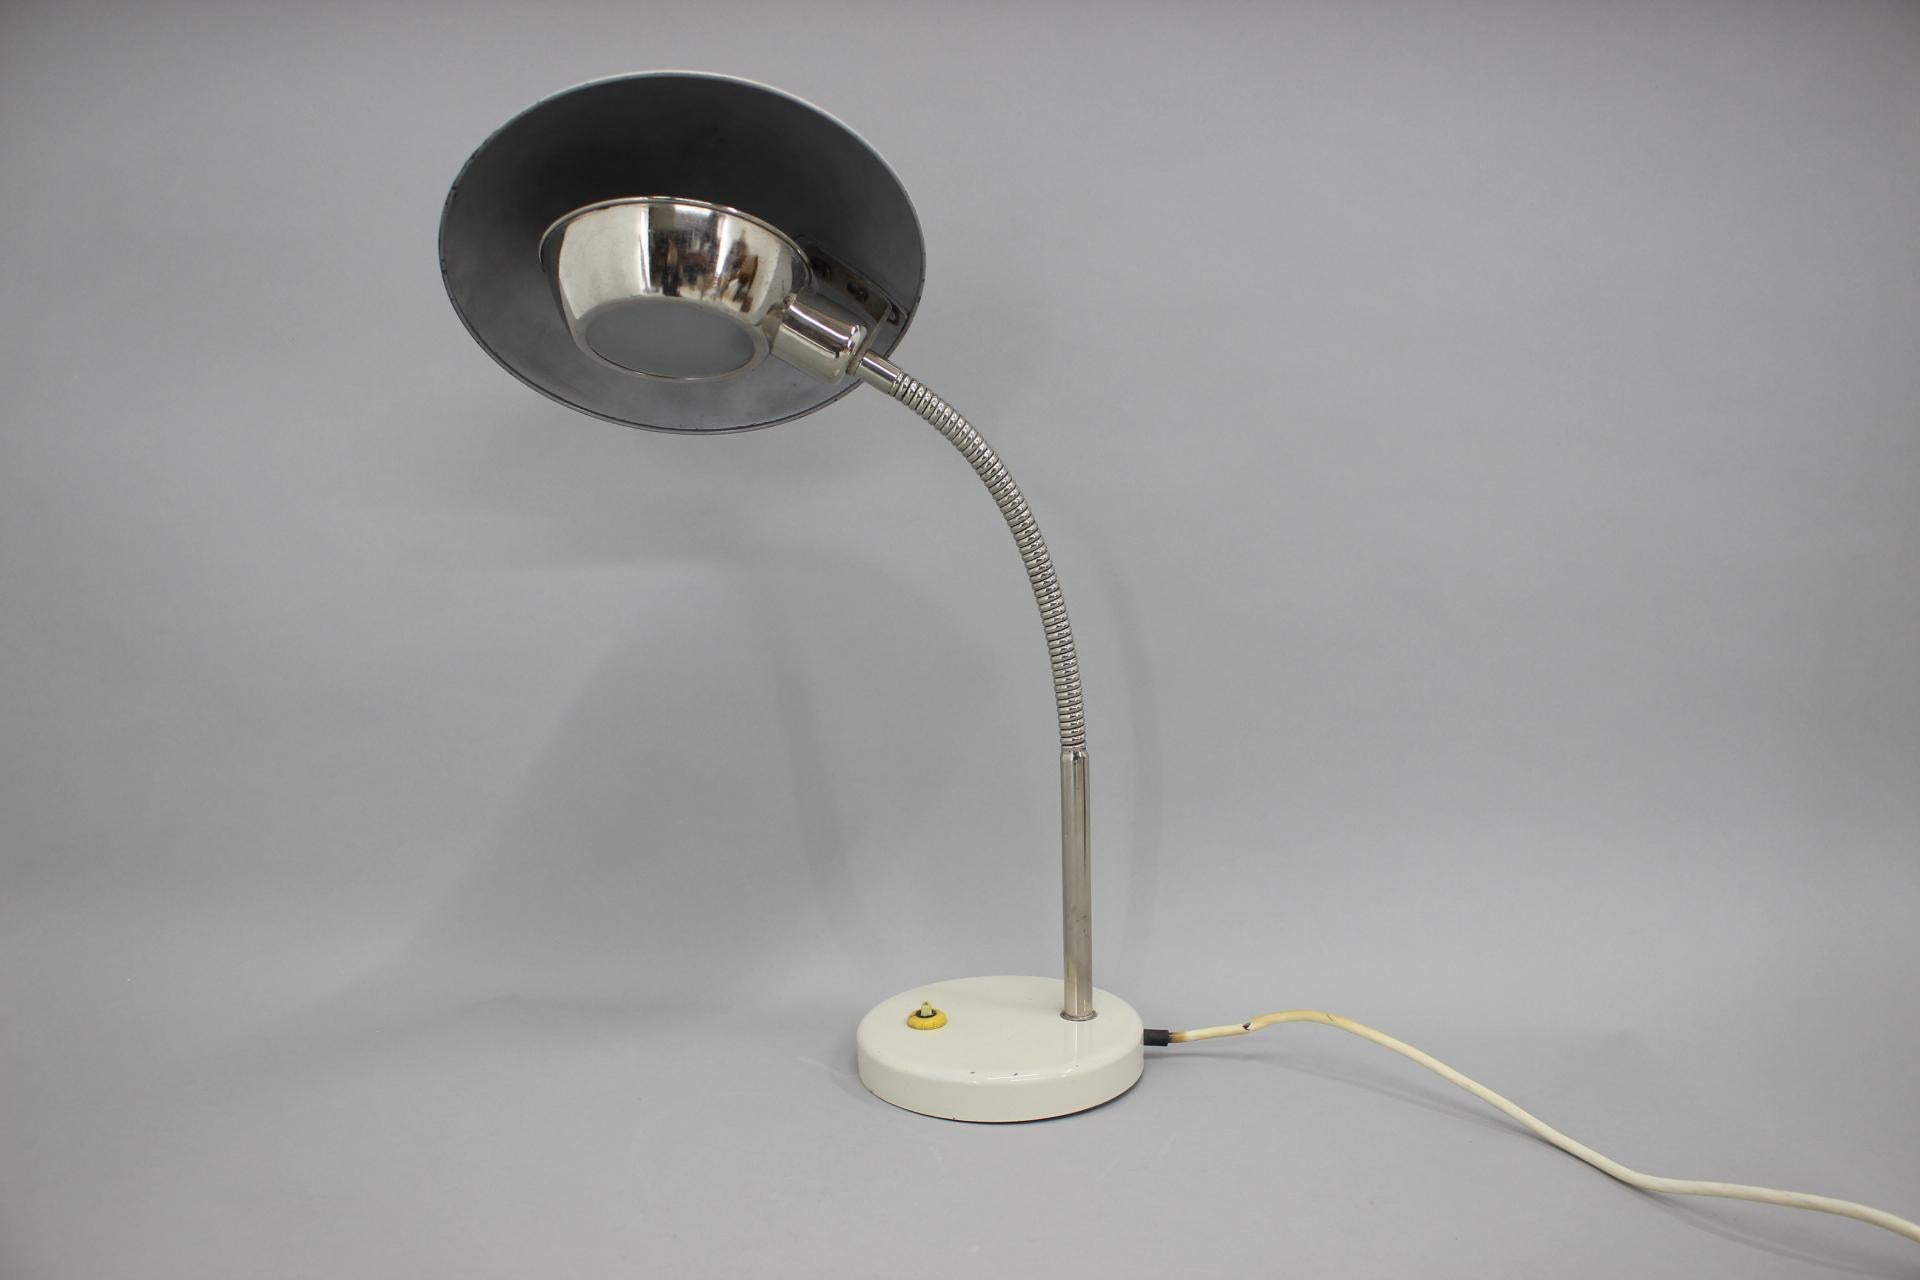 Table lamp with flexible shade.
Rewired: 1x40W, E12-E14 bulb.
US plug adapter included.
Good original condition with some signs of use.